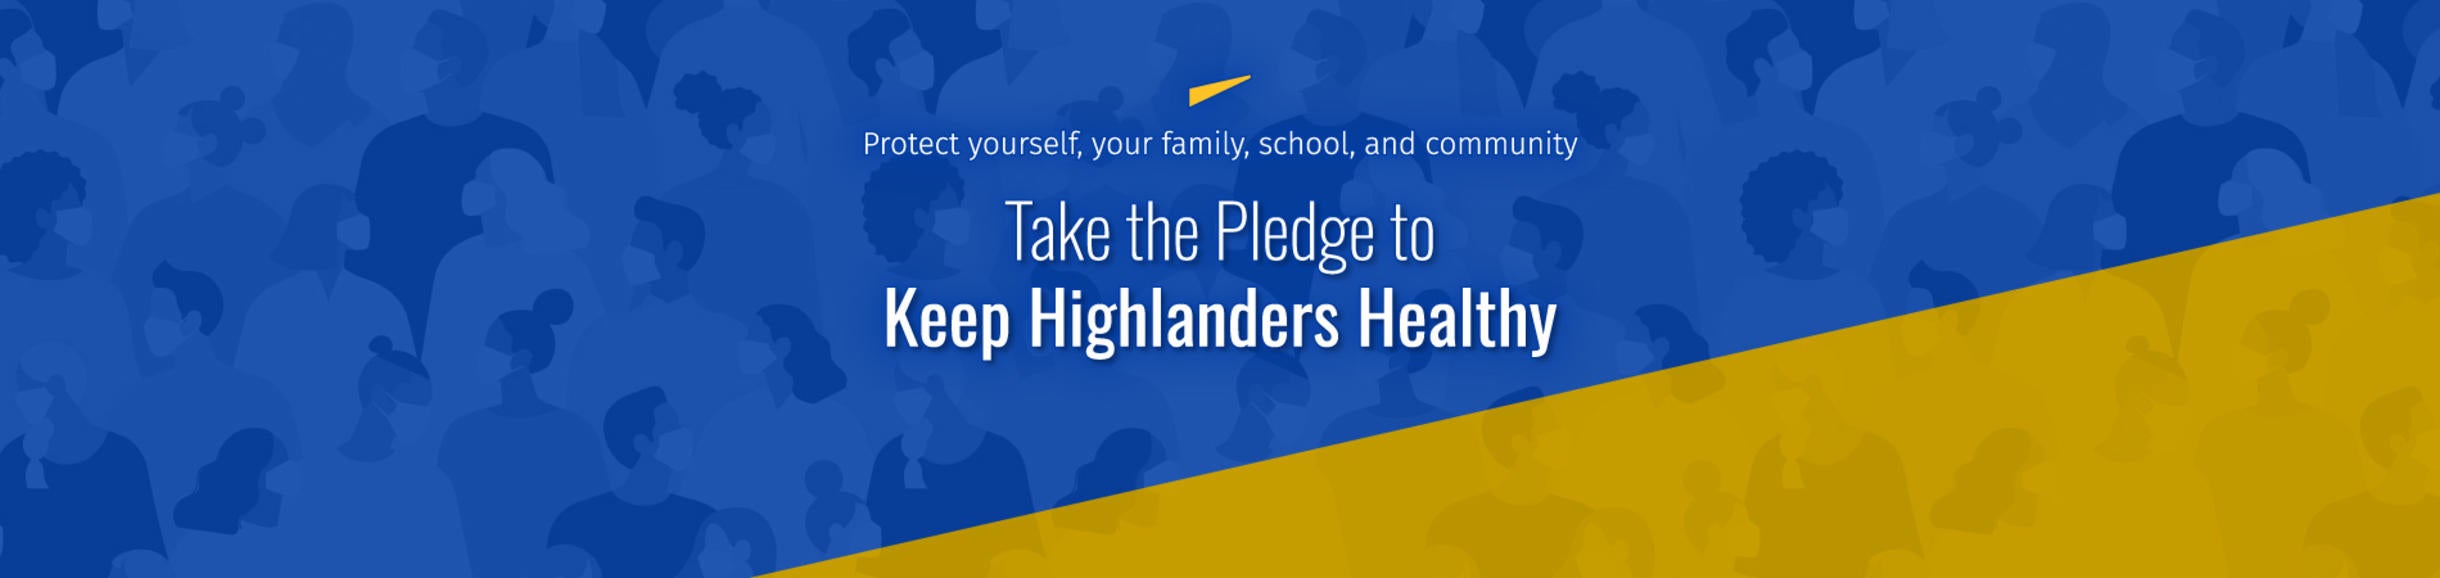 Protect yourself, your family, school, and community | Take the Pledge to Keep Highlanders Healthy